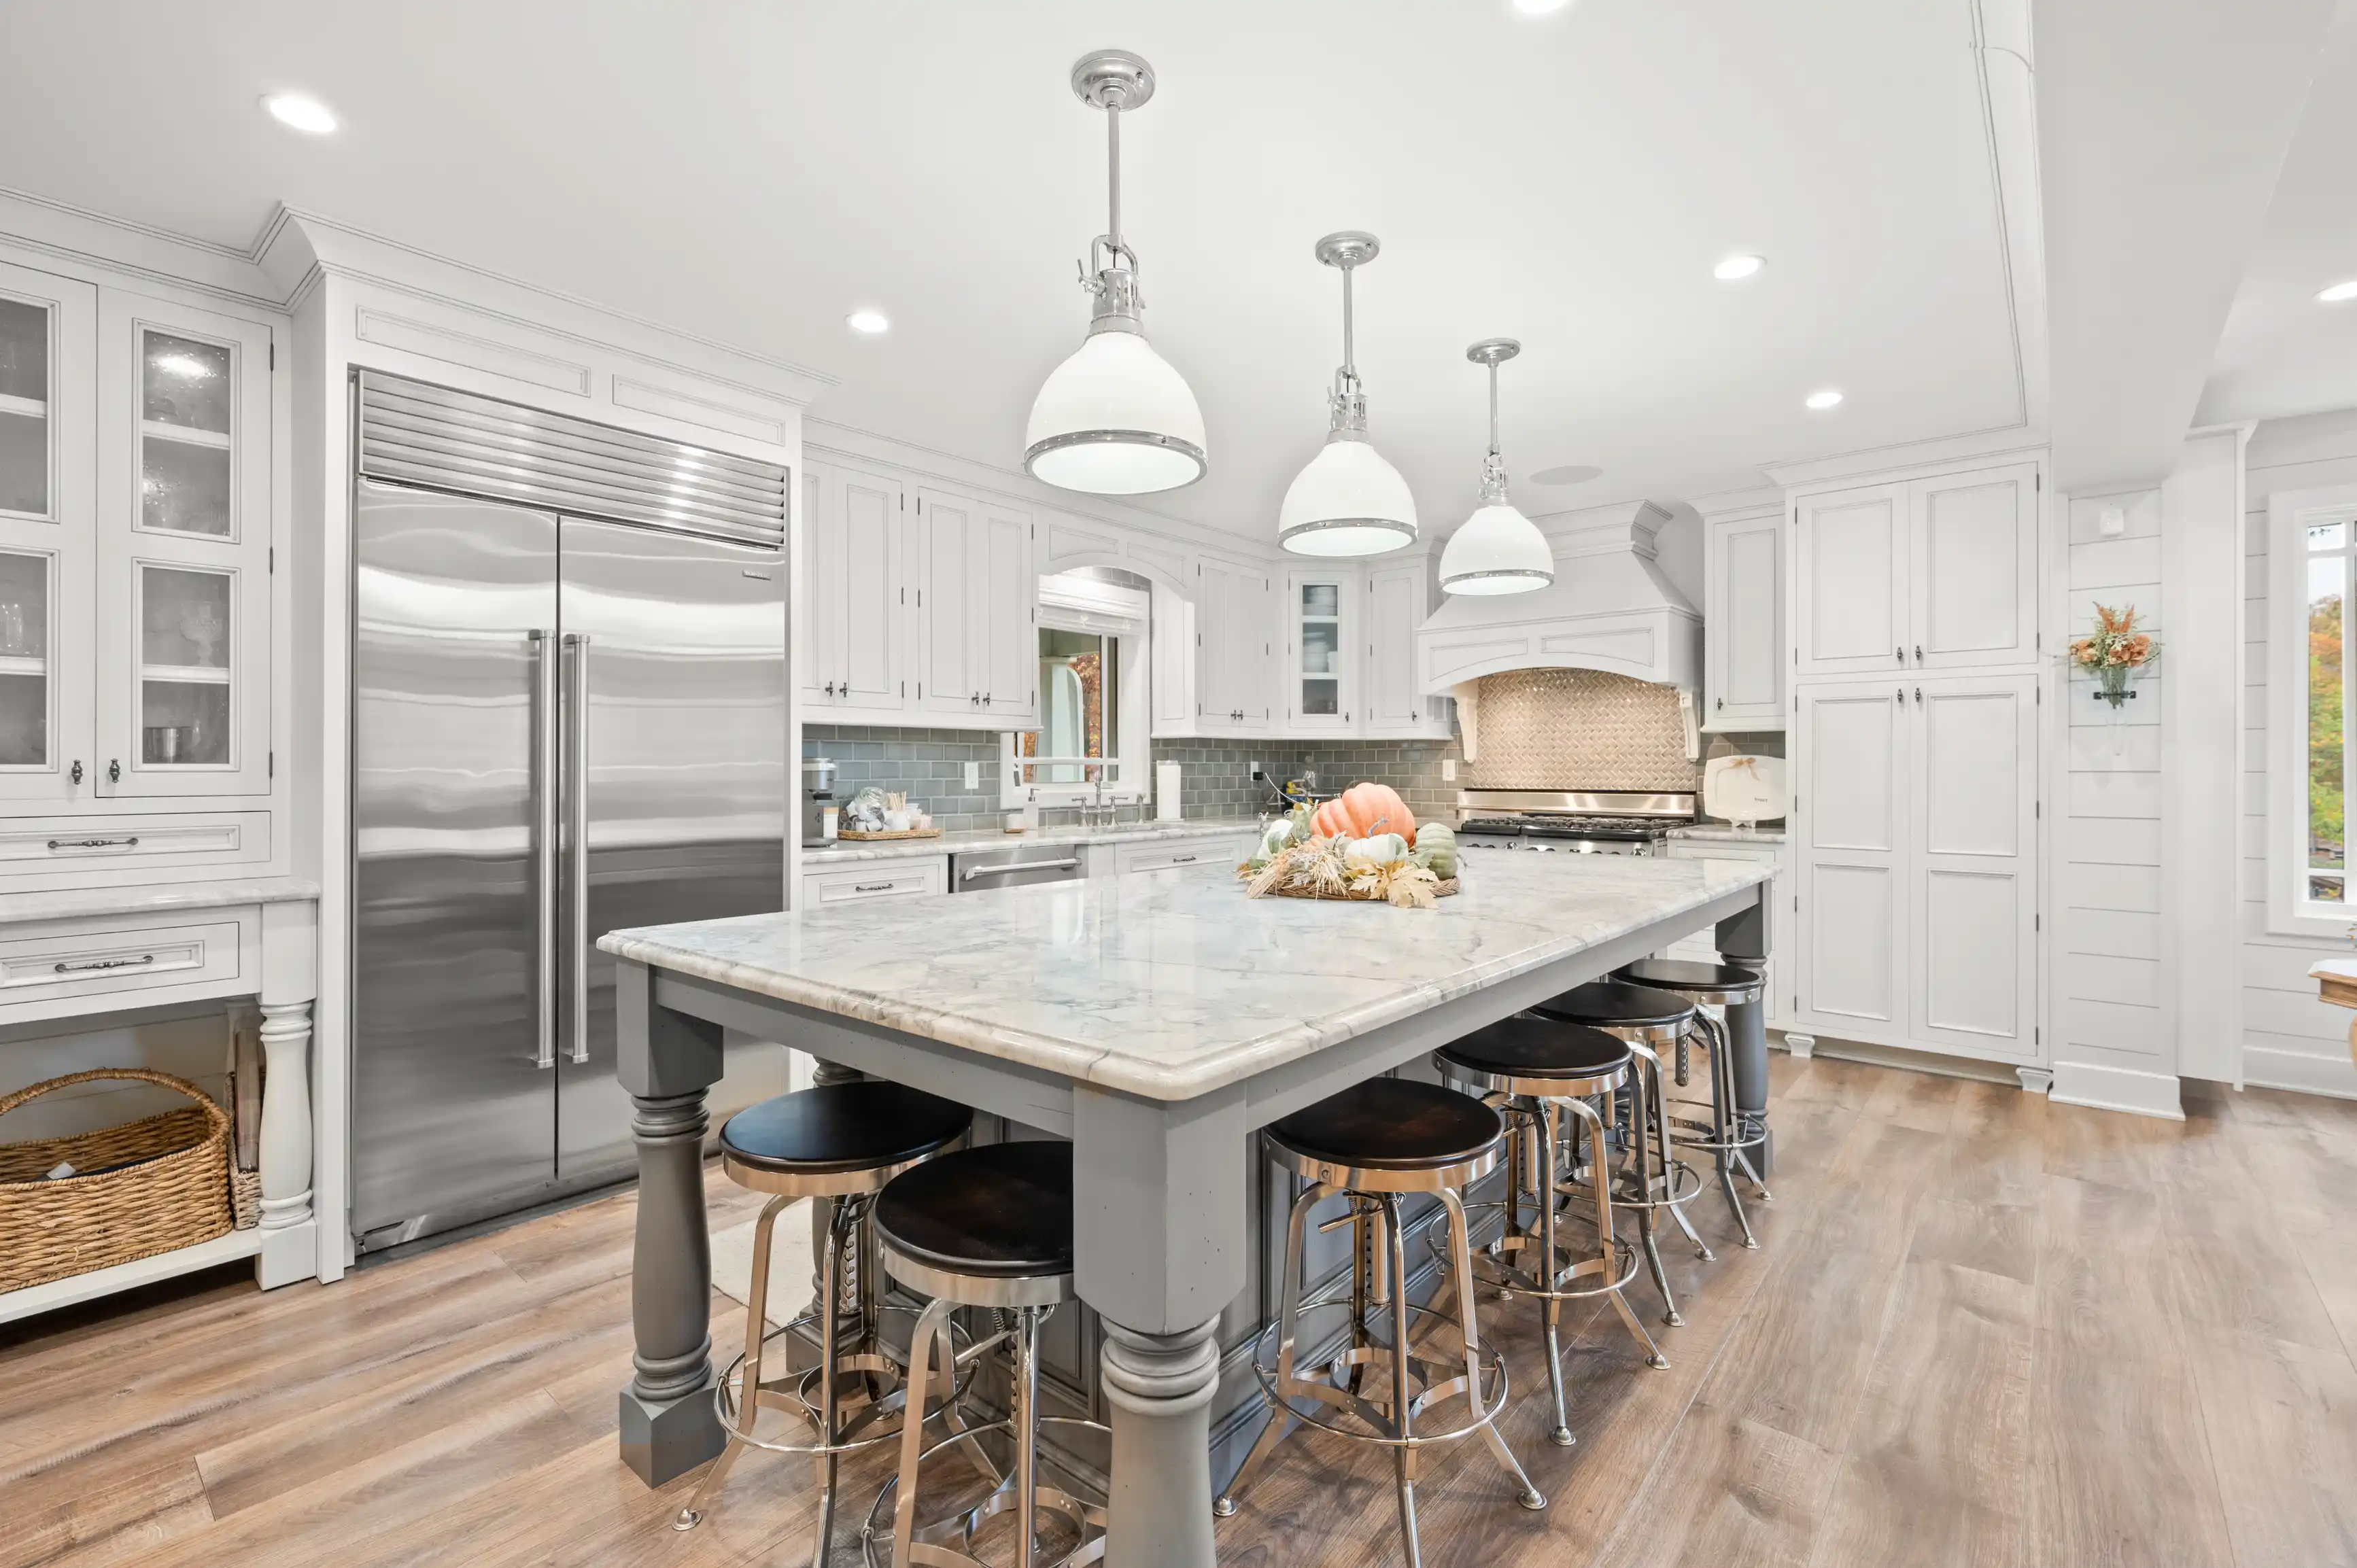 Bright contemporary kitchen interior with white cabinets, marble countertop island, bar stools, stainless steel appliances, and pendant lighting.